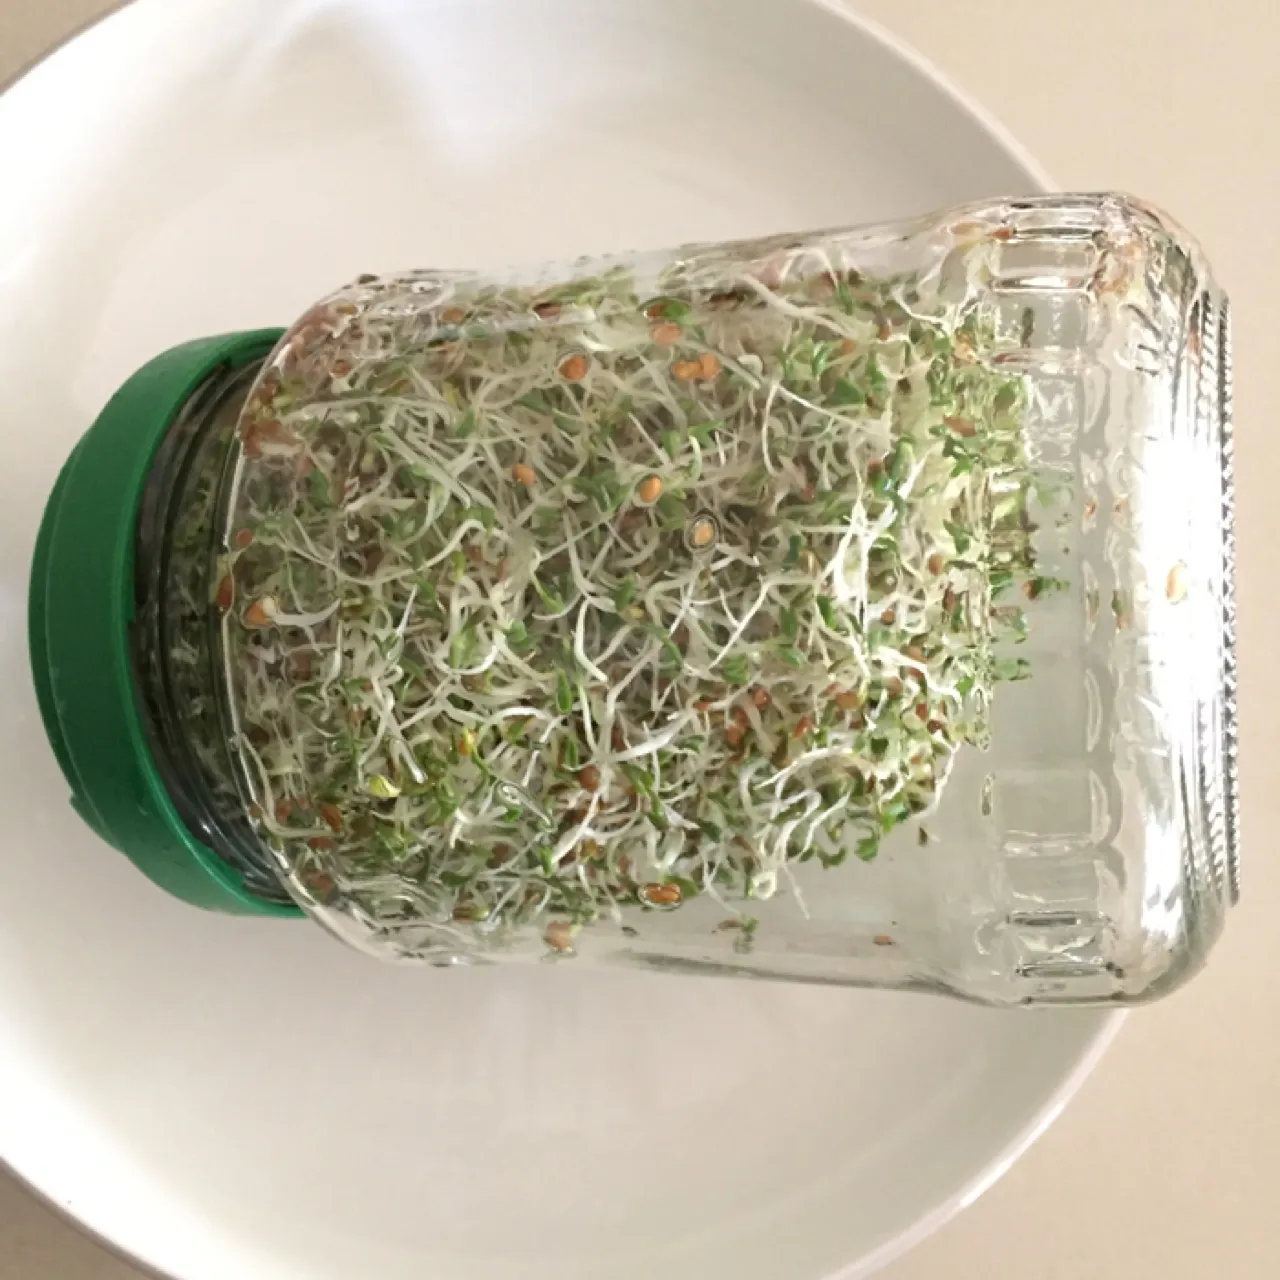 Sprouts in the jar are almost ready